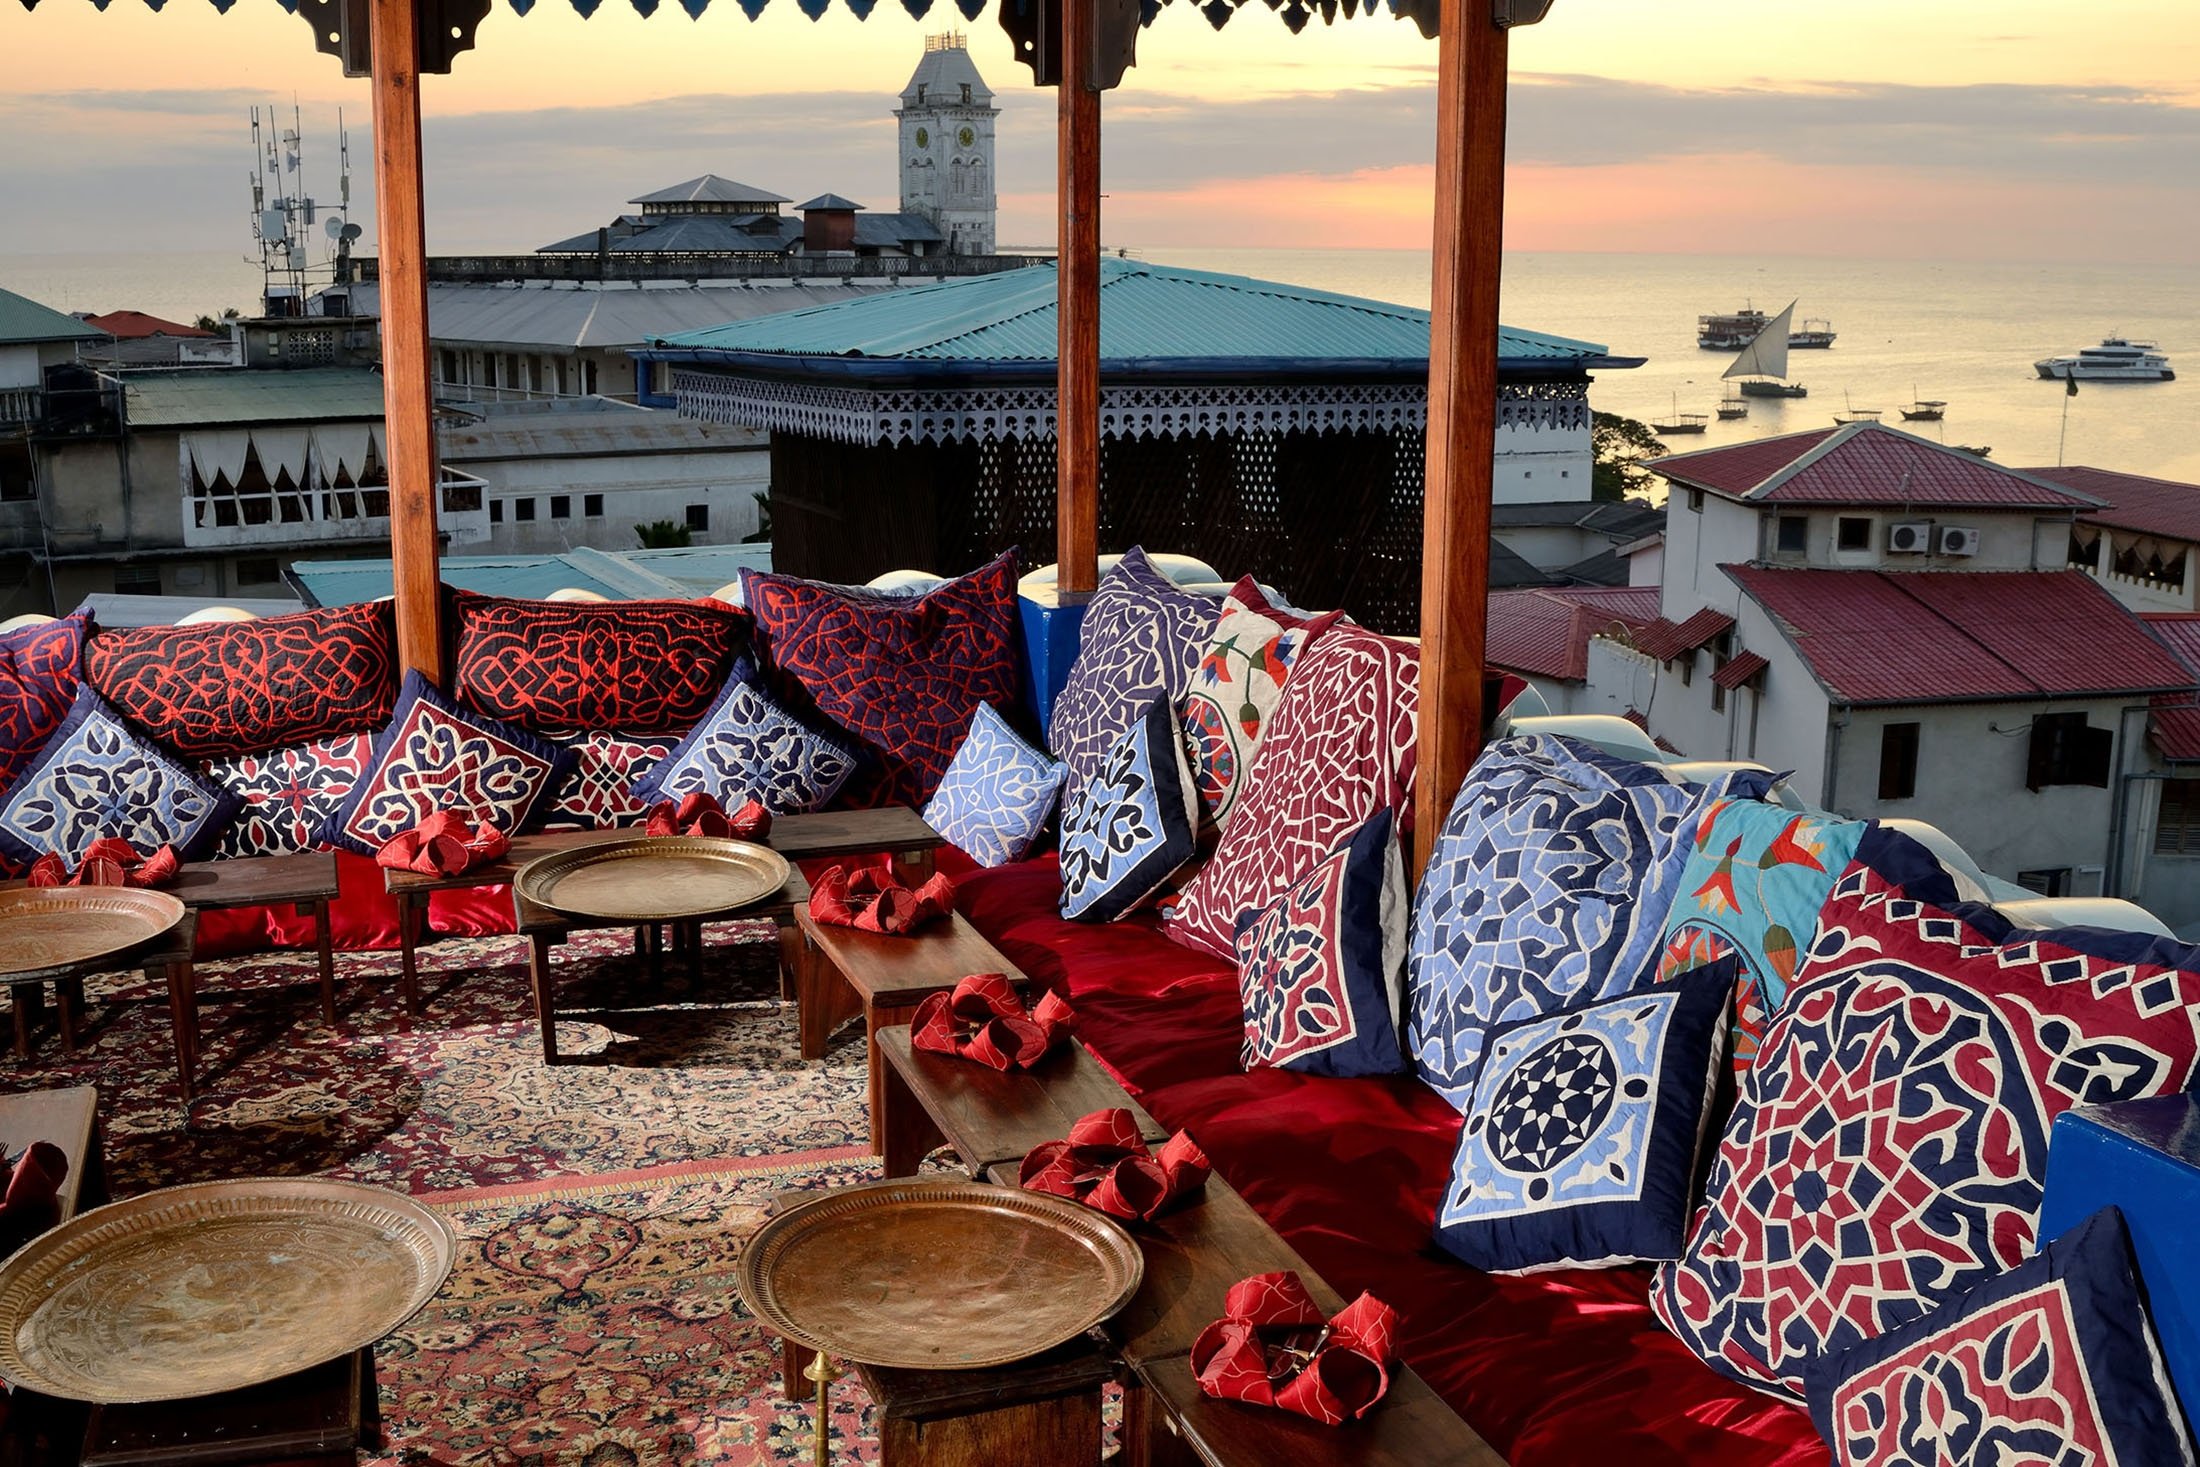 The roof terrace of the Emerson Hotel in Zanzibar, which has remained largely open during the epidemic. (Andrew Morgan via dpa)